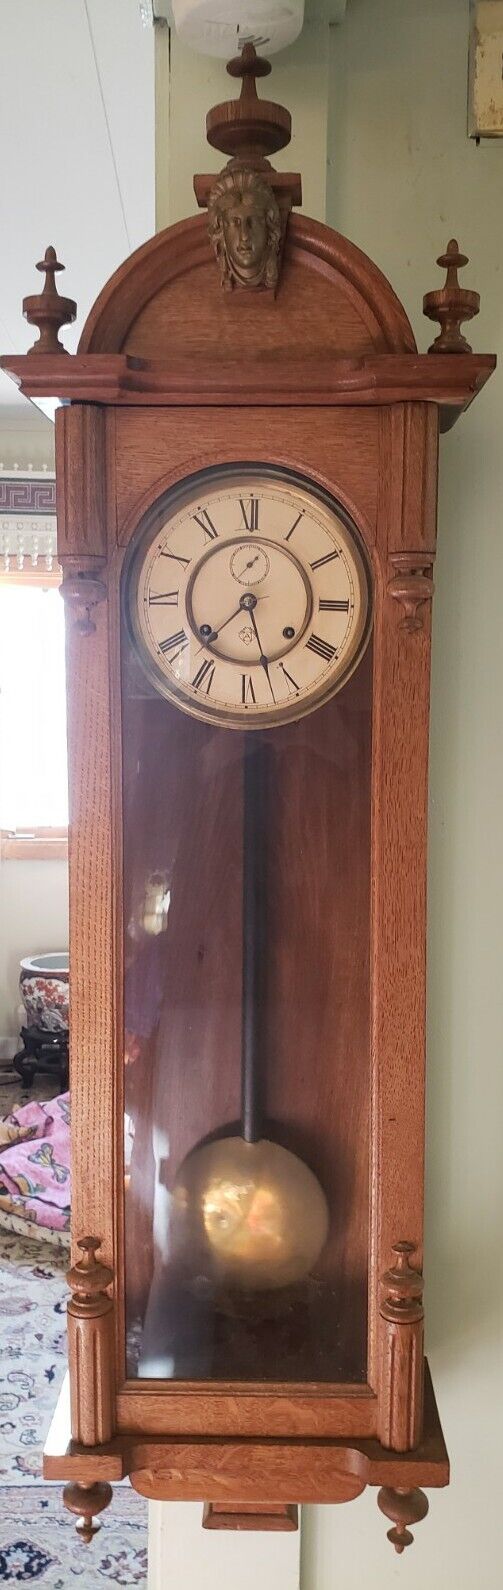 ANTIQUE ANSONIA CAPITAL WALL CLOCK 15 DAY MOVEMENT